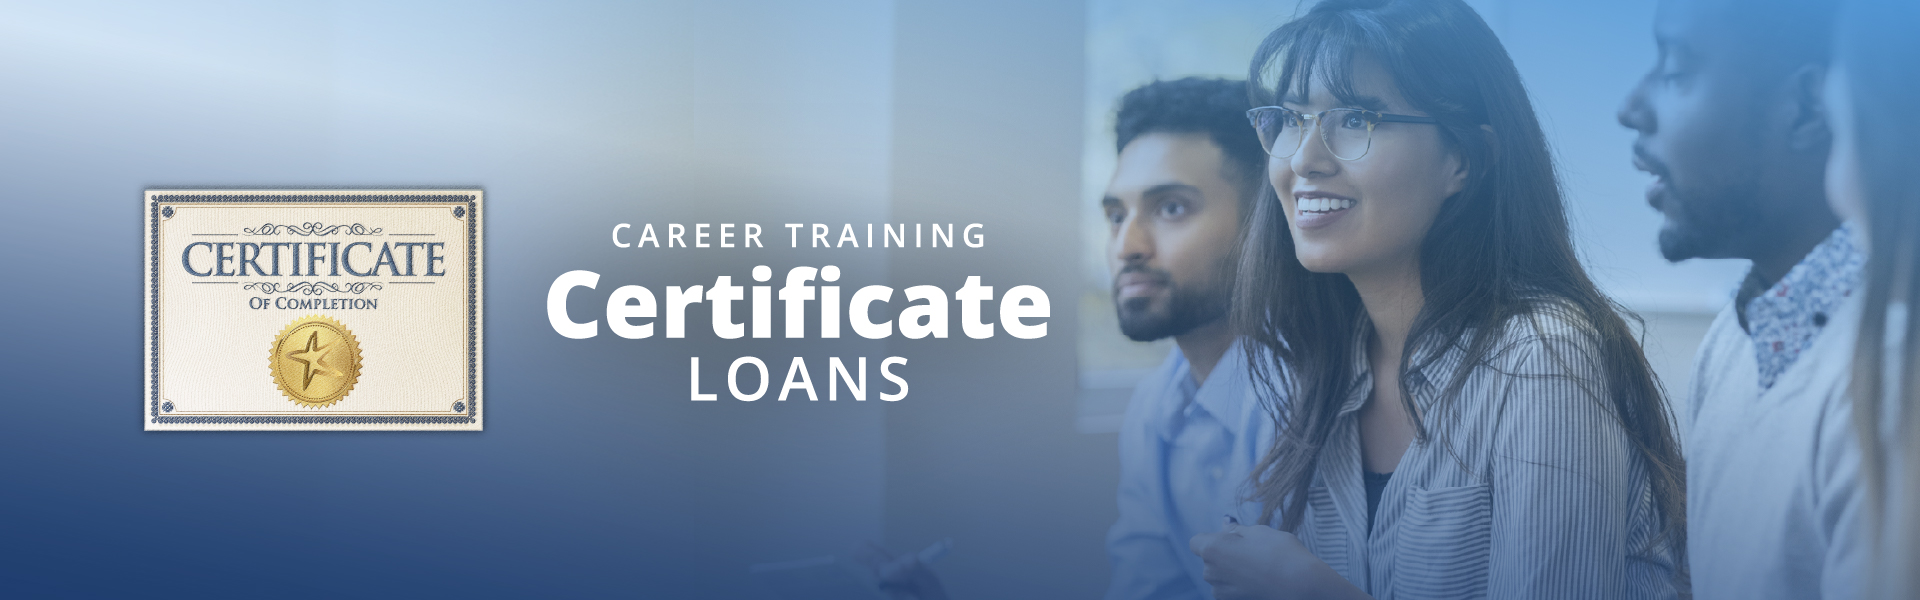 “Career Training Certificate Loans” overlayed on a photo of a group of people in a career training program